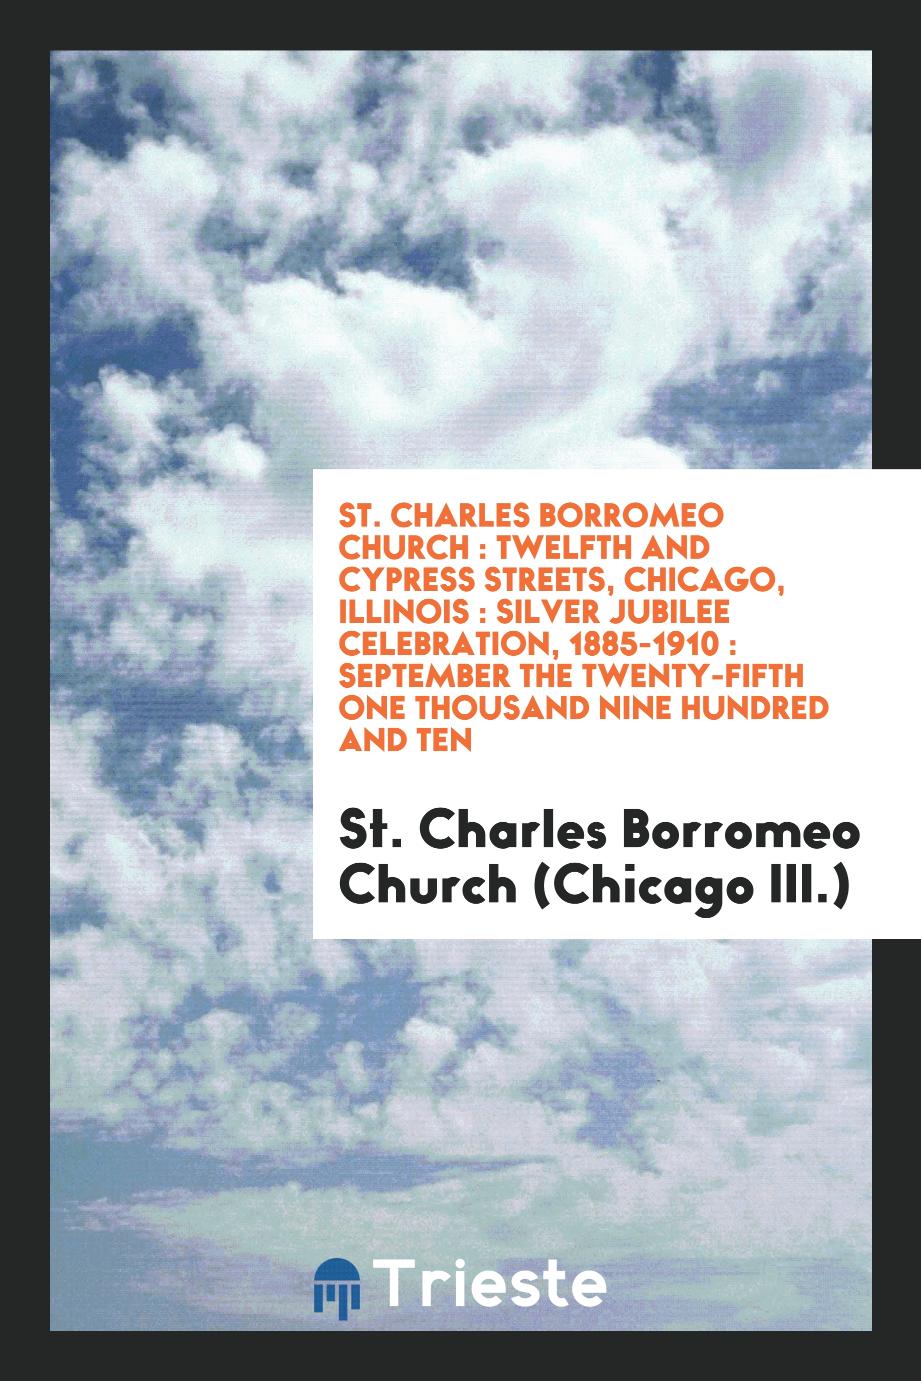 St. Charles Borromeo Church : Twelfth and Cypress Streets, Chicago, Illinois : silver jubilee celebration, 1885-1910 : September the twenty-fifth one thousand nine hundred and ten